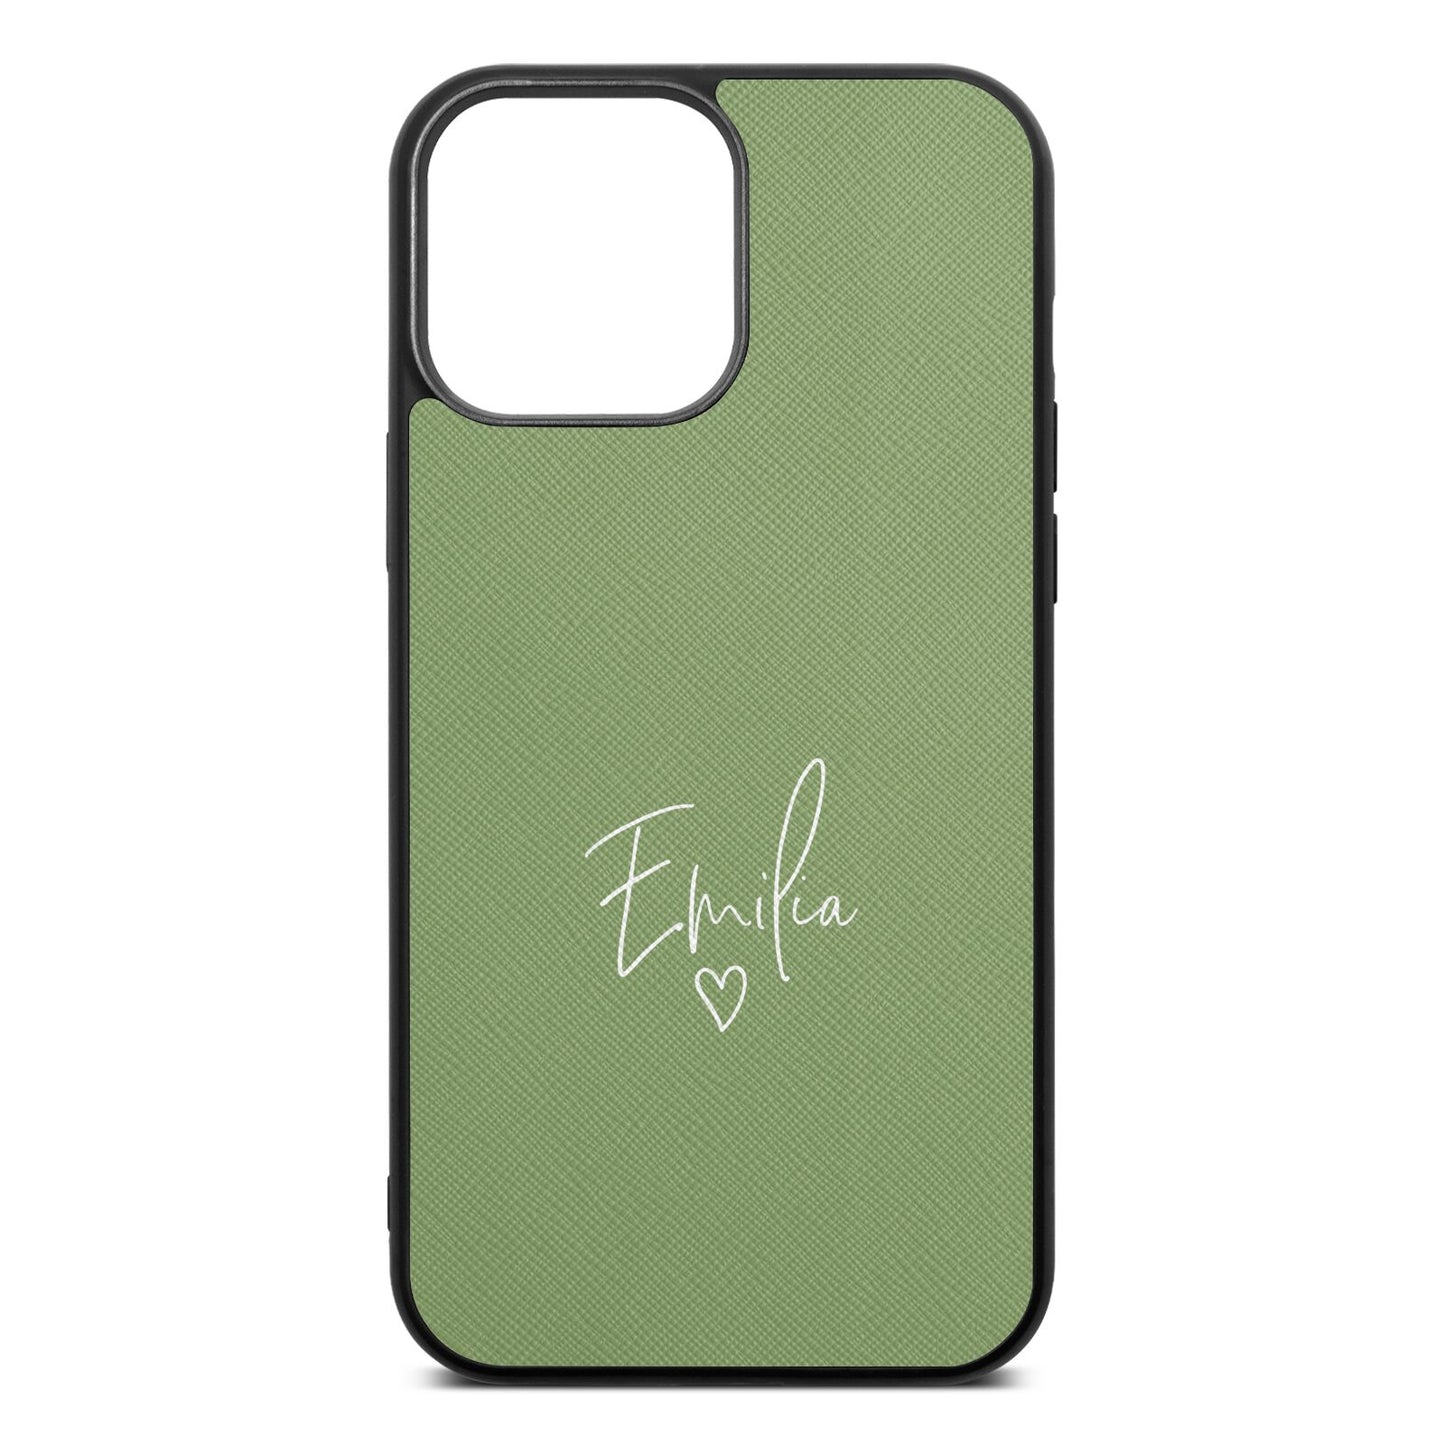 White Handwritten Name Transparent Lime Saffiano Leather iPhone 13 Pro Max Case